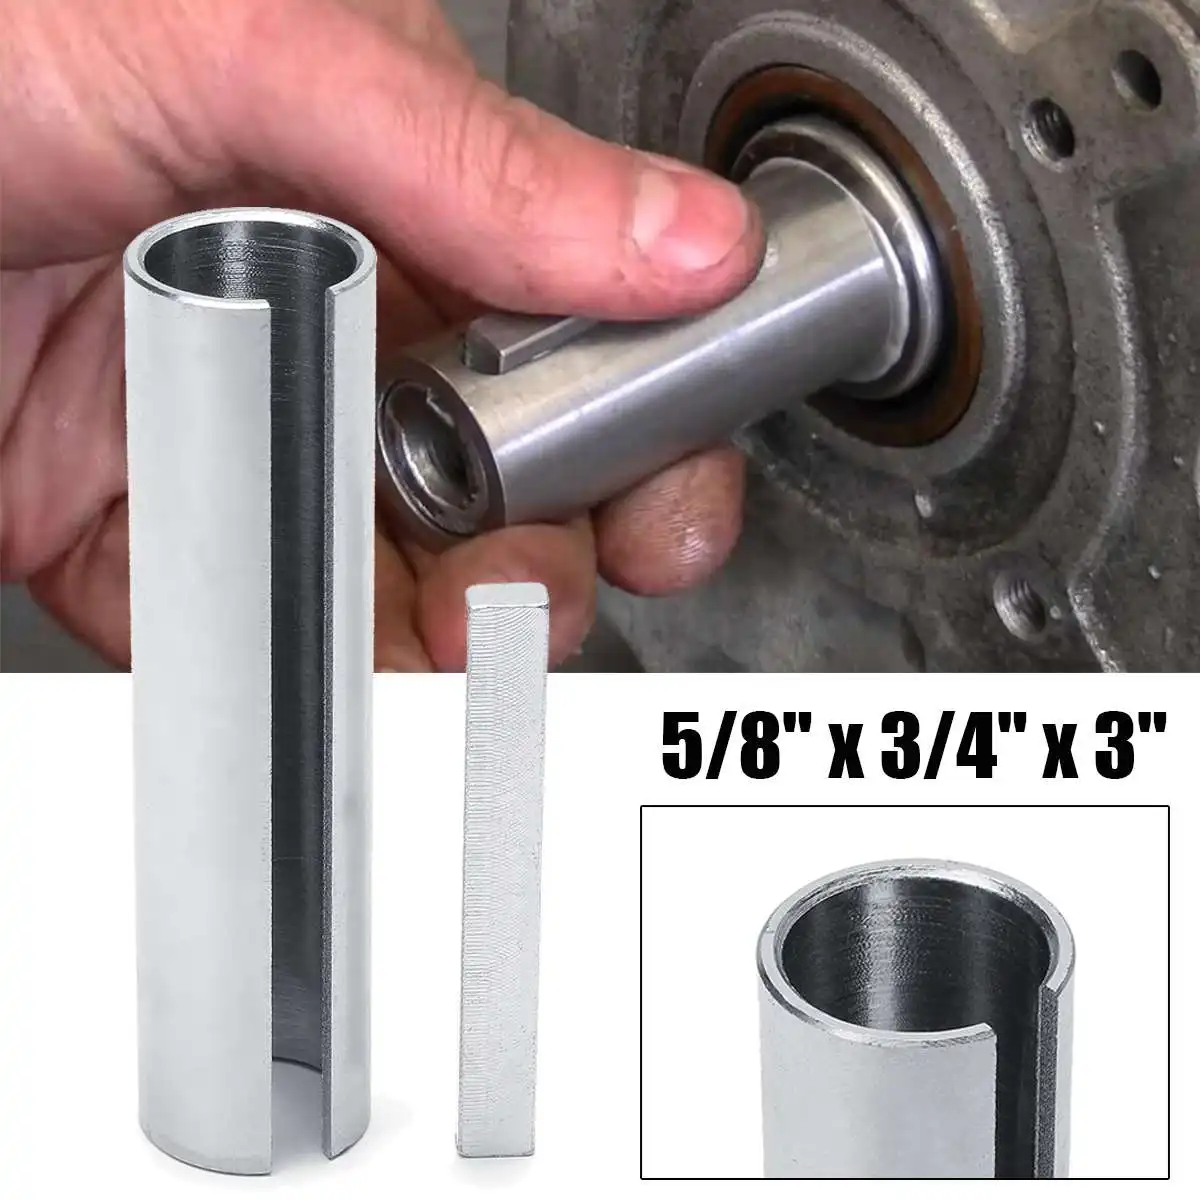 1-1 1/8-3 Shaft Adapter Pulley for Bore Reducer Fits Sleeve Bushing Sheave Key Free E-Book in A Gift Home HINTS and Timeless Tips 1 